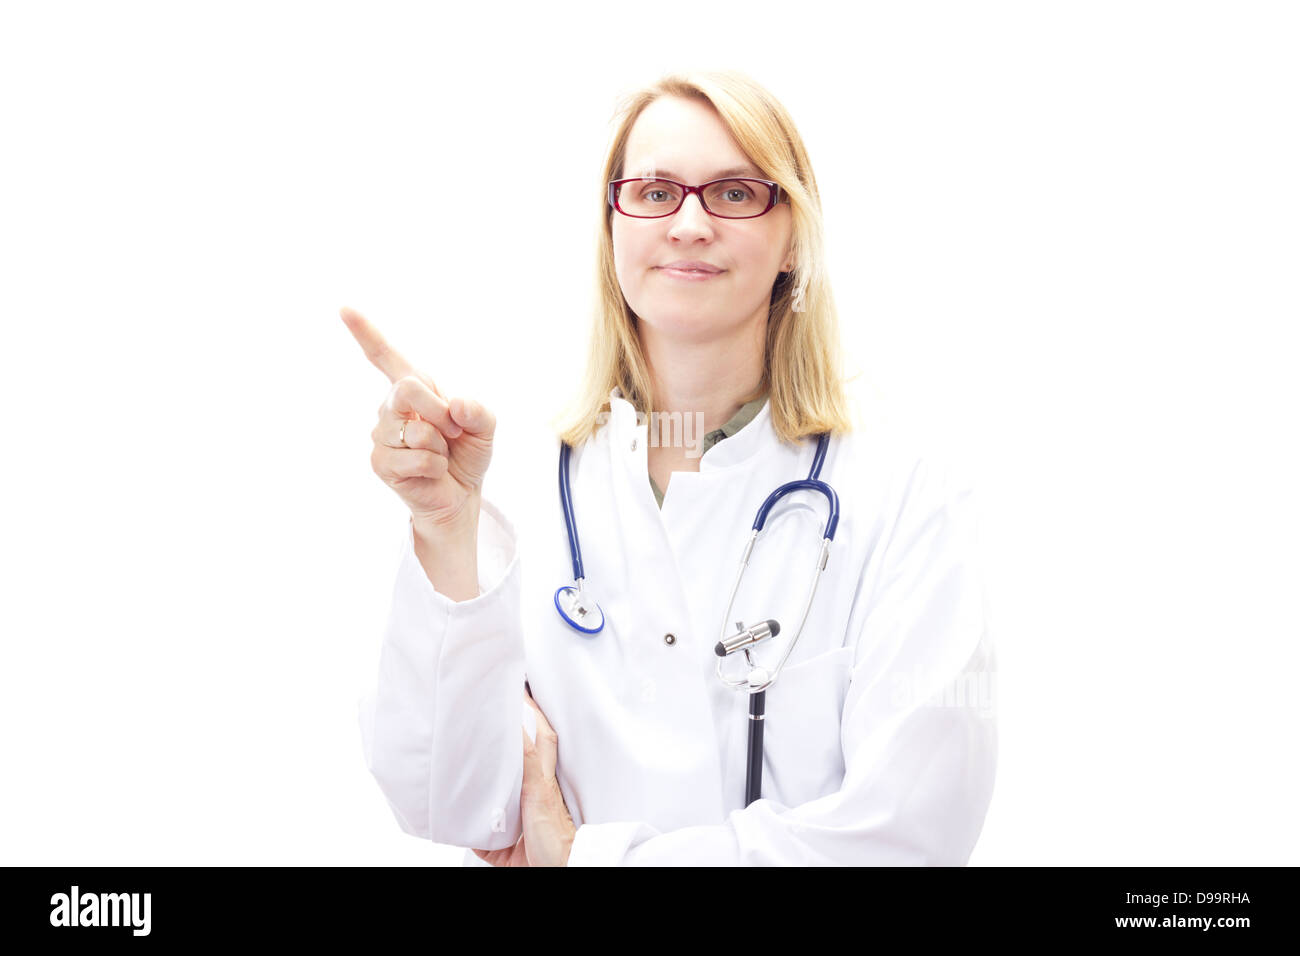 Professional female doctor pointing at something Stock Photo